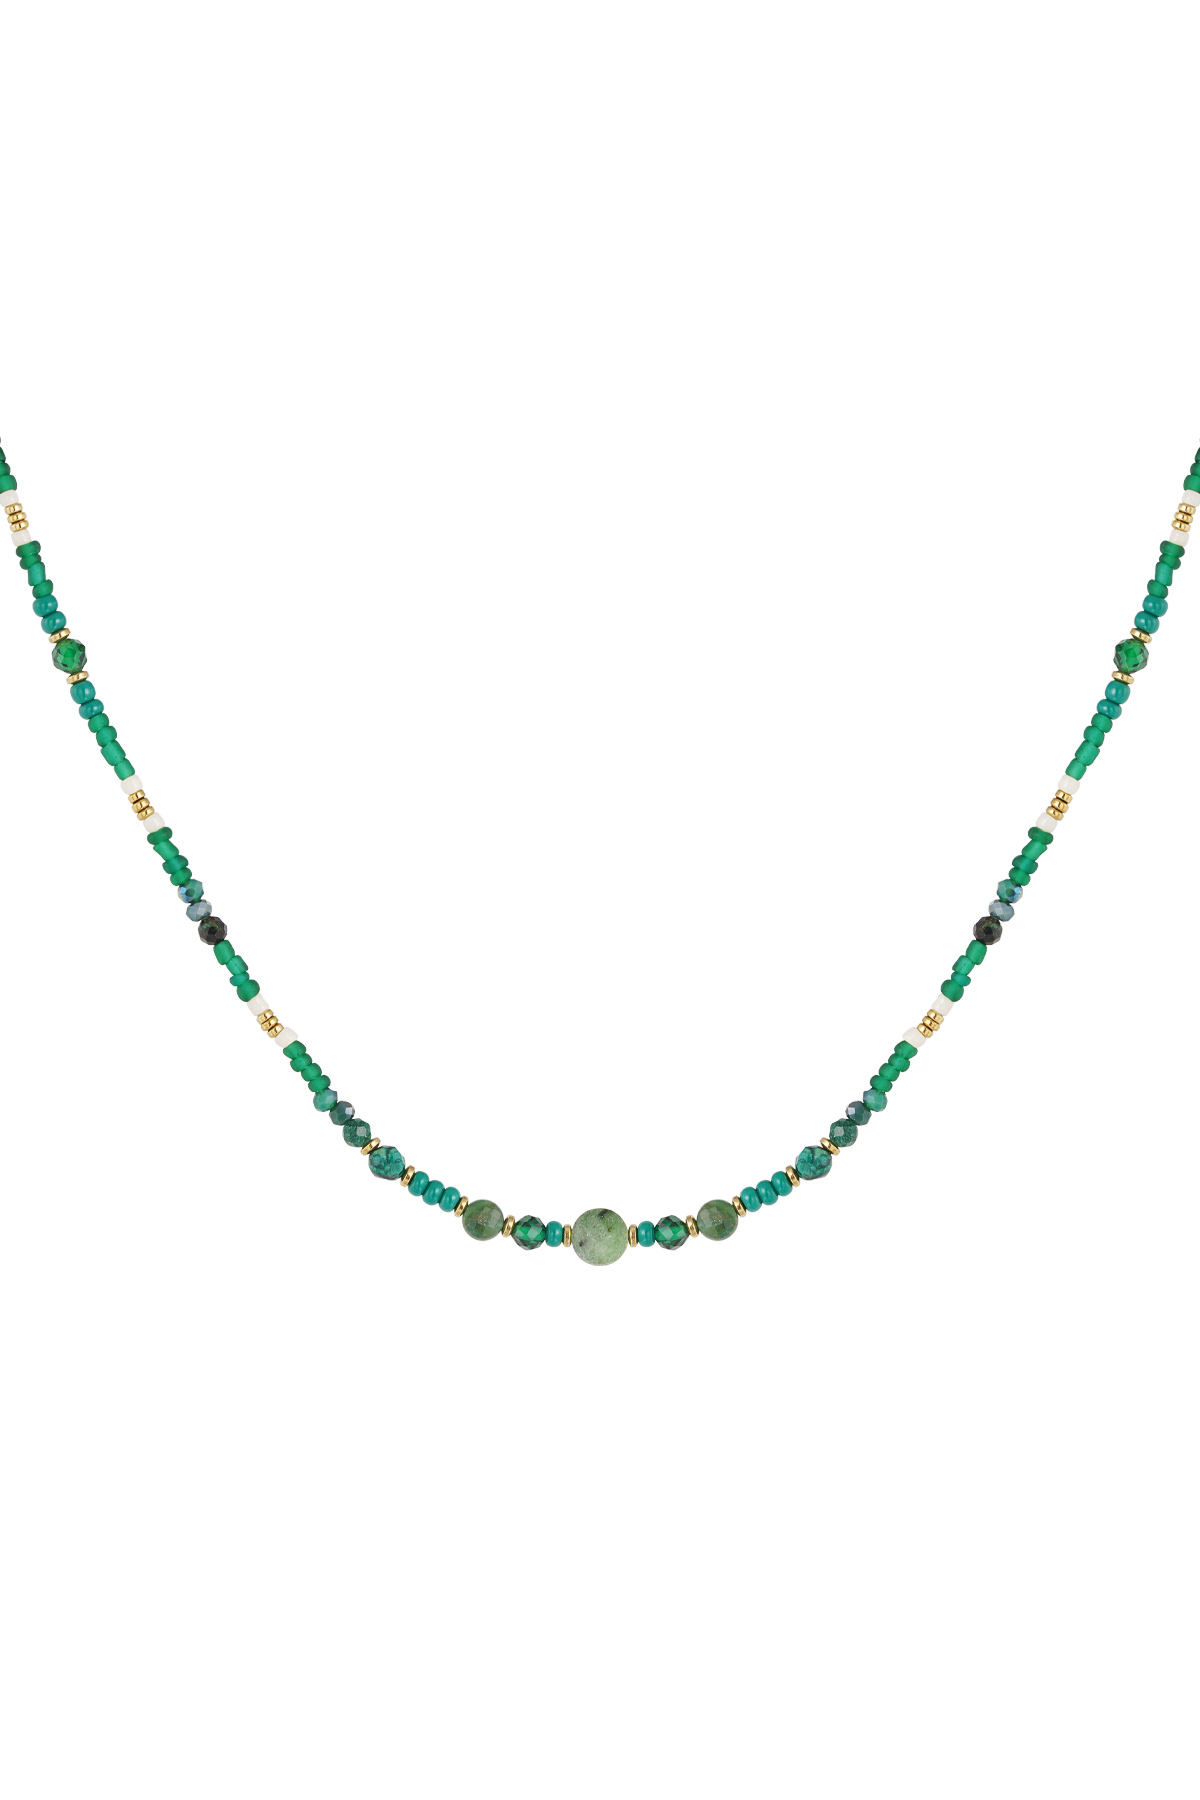 Necklace green beads - green 